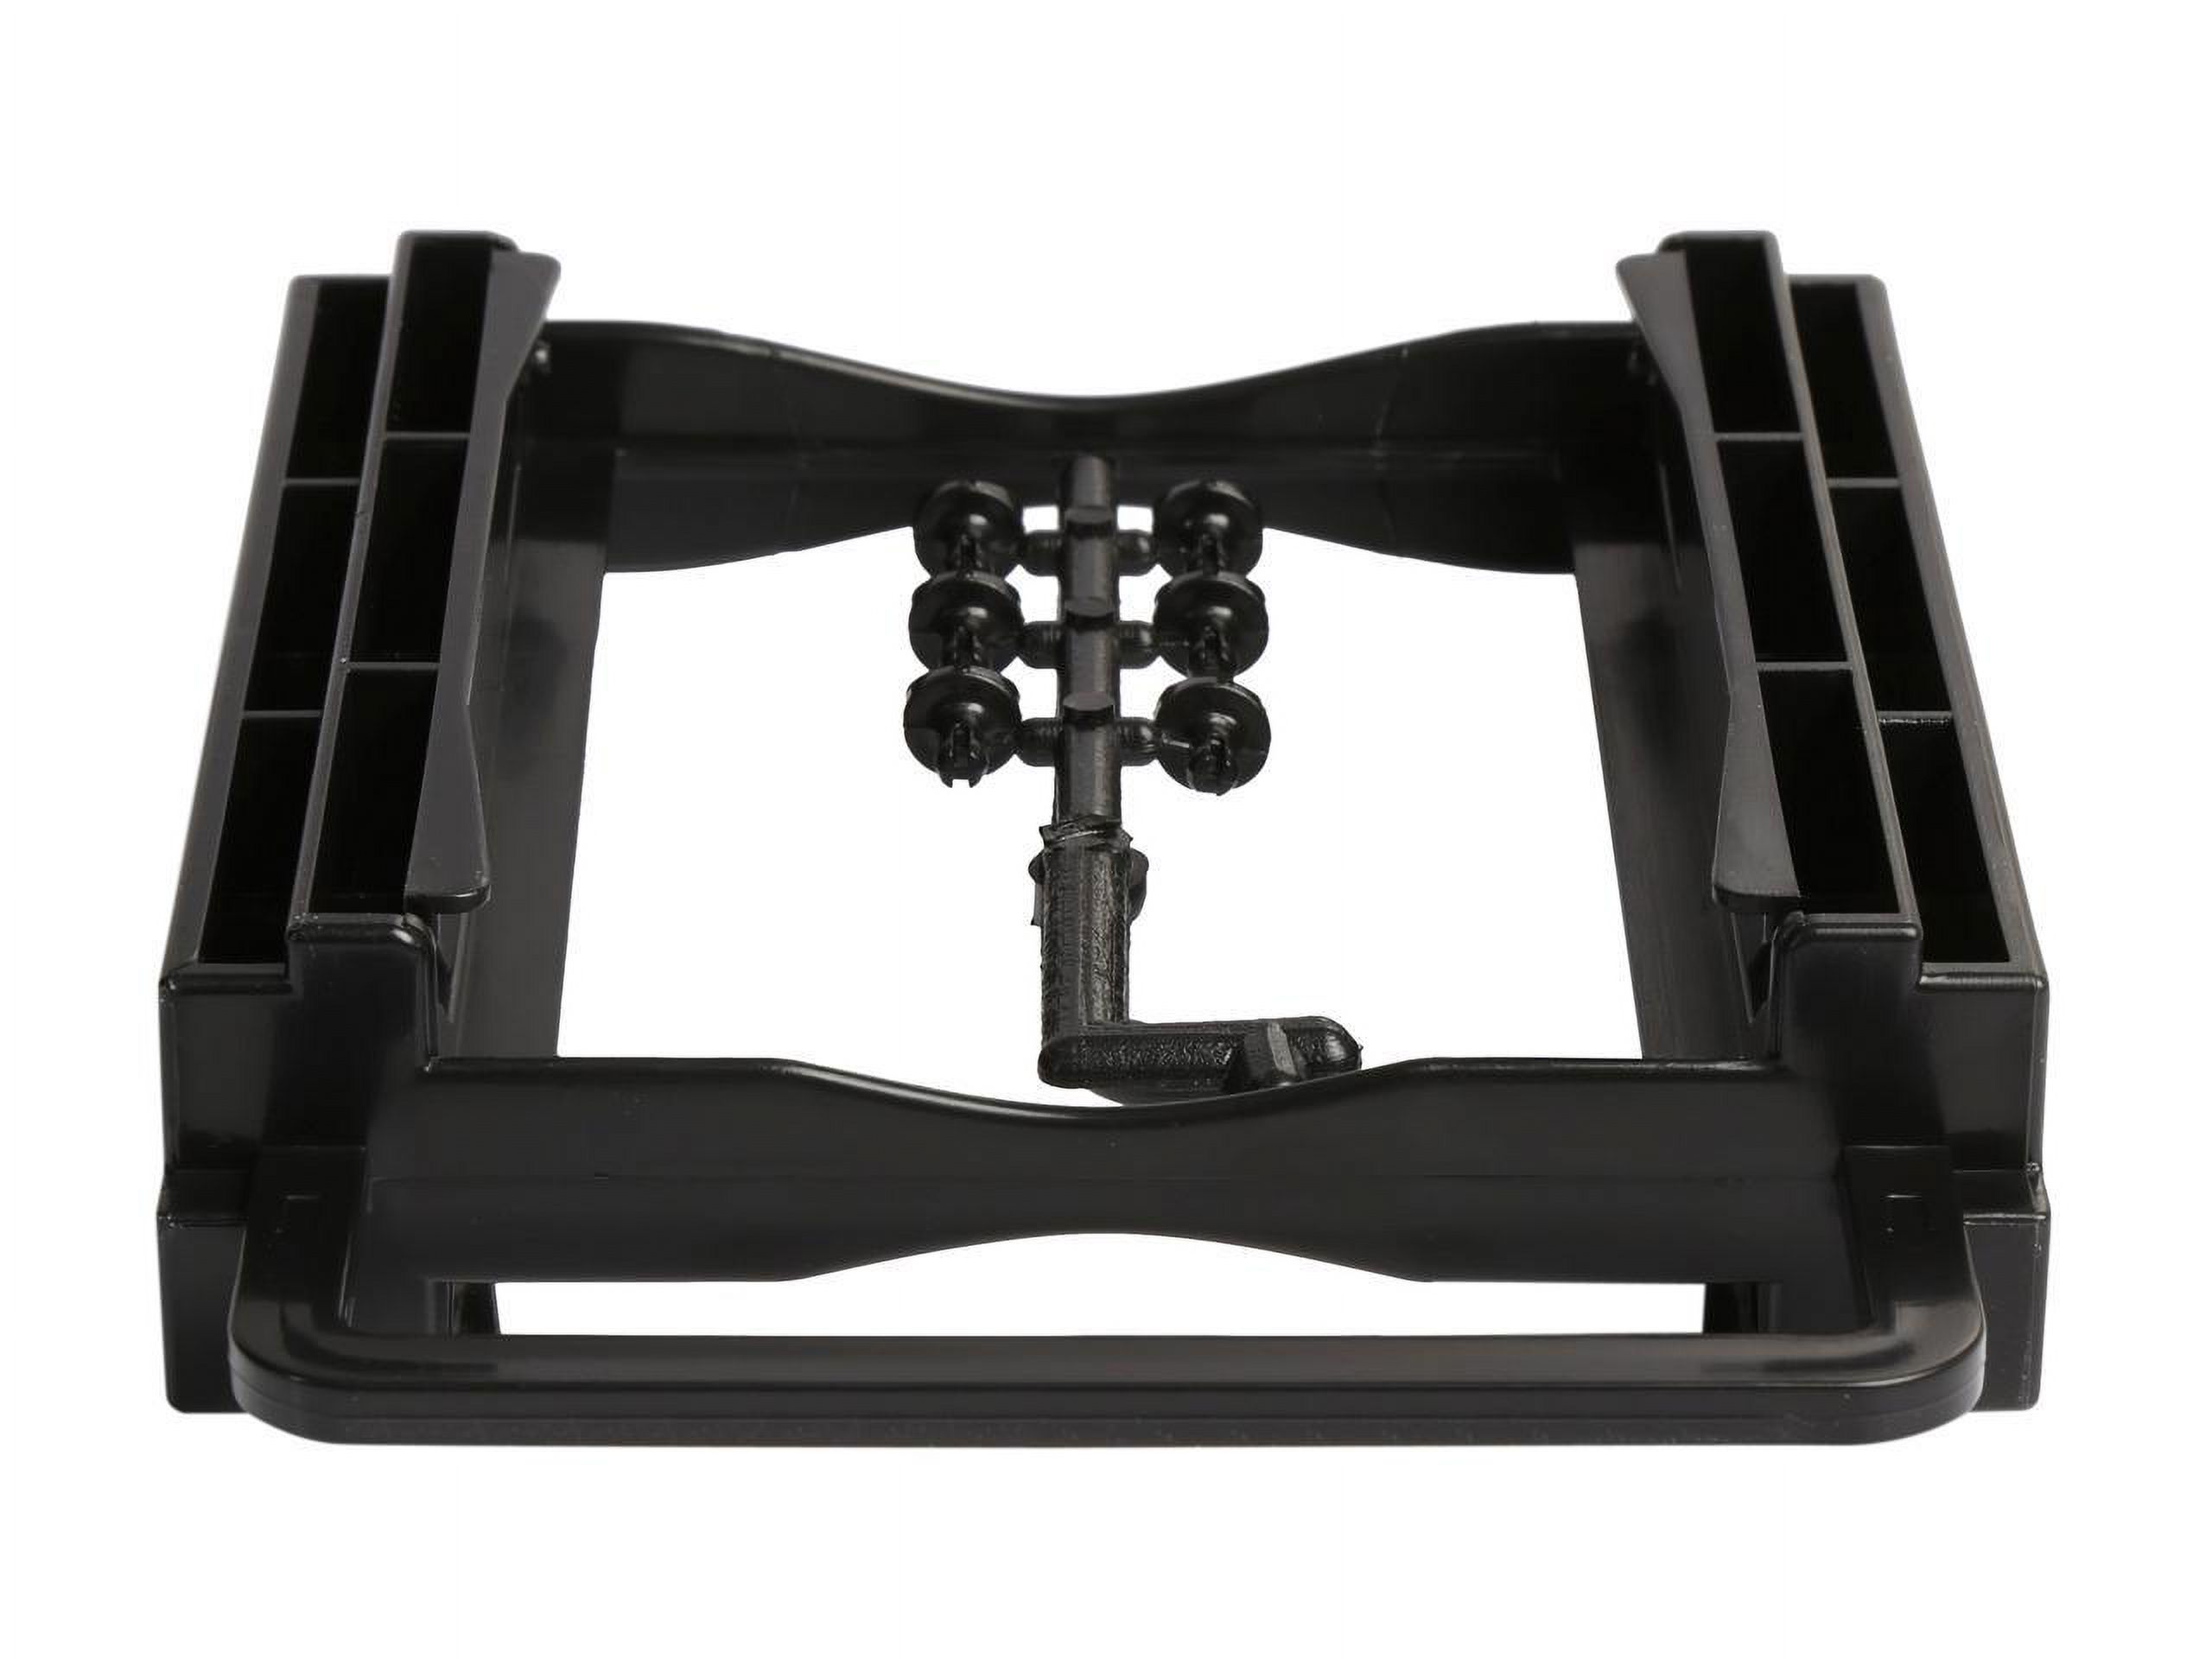 BRACKET225PT Dual 2.5in SSD/HDD Mounting Bracket for 3.5in Drive Bay - image 4 of 7